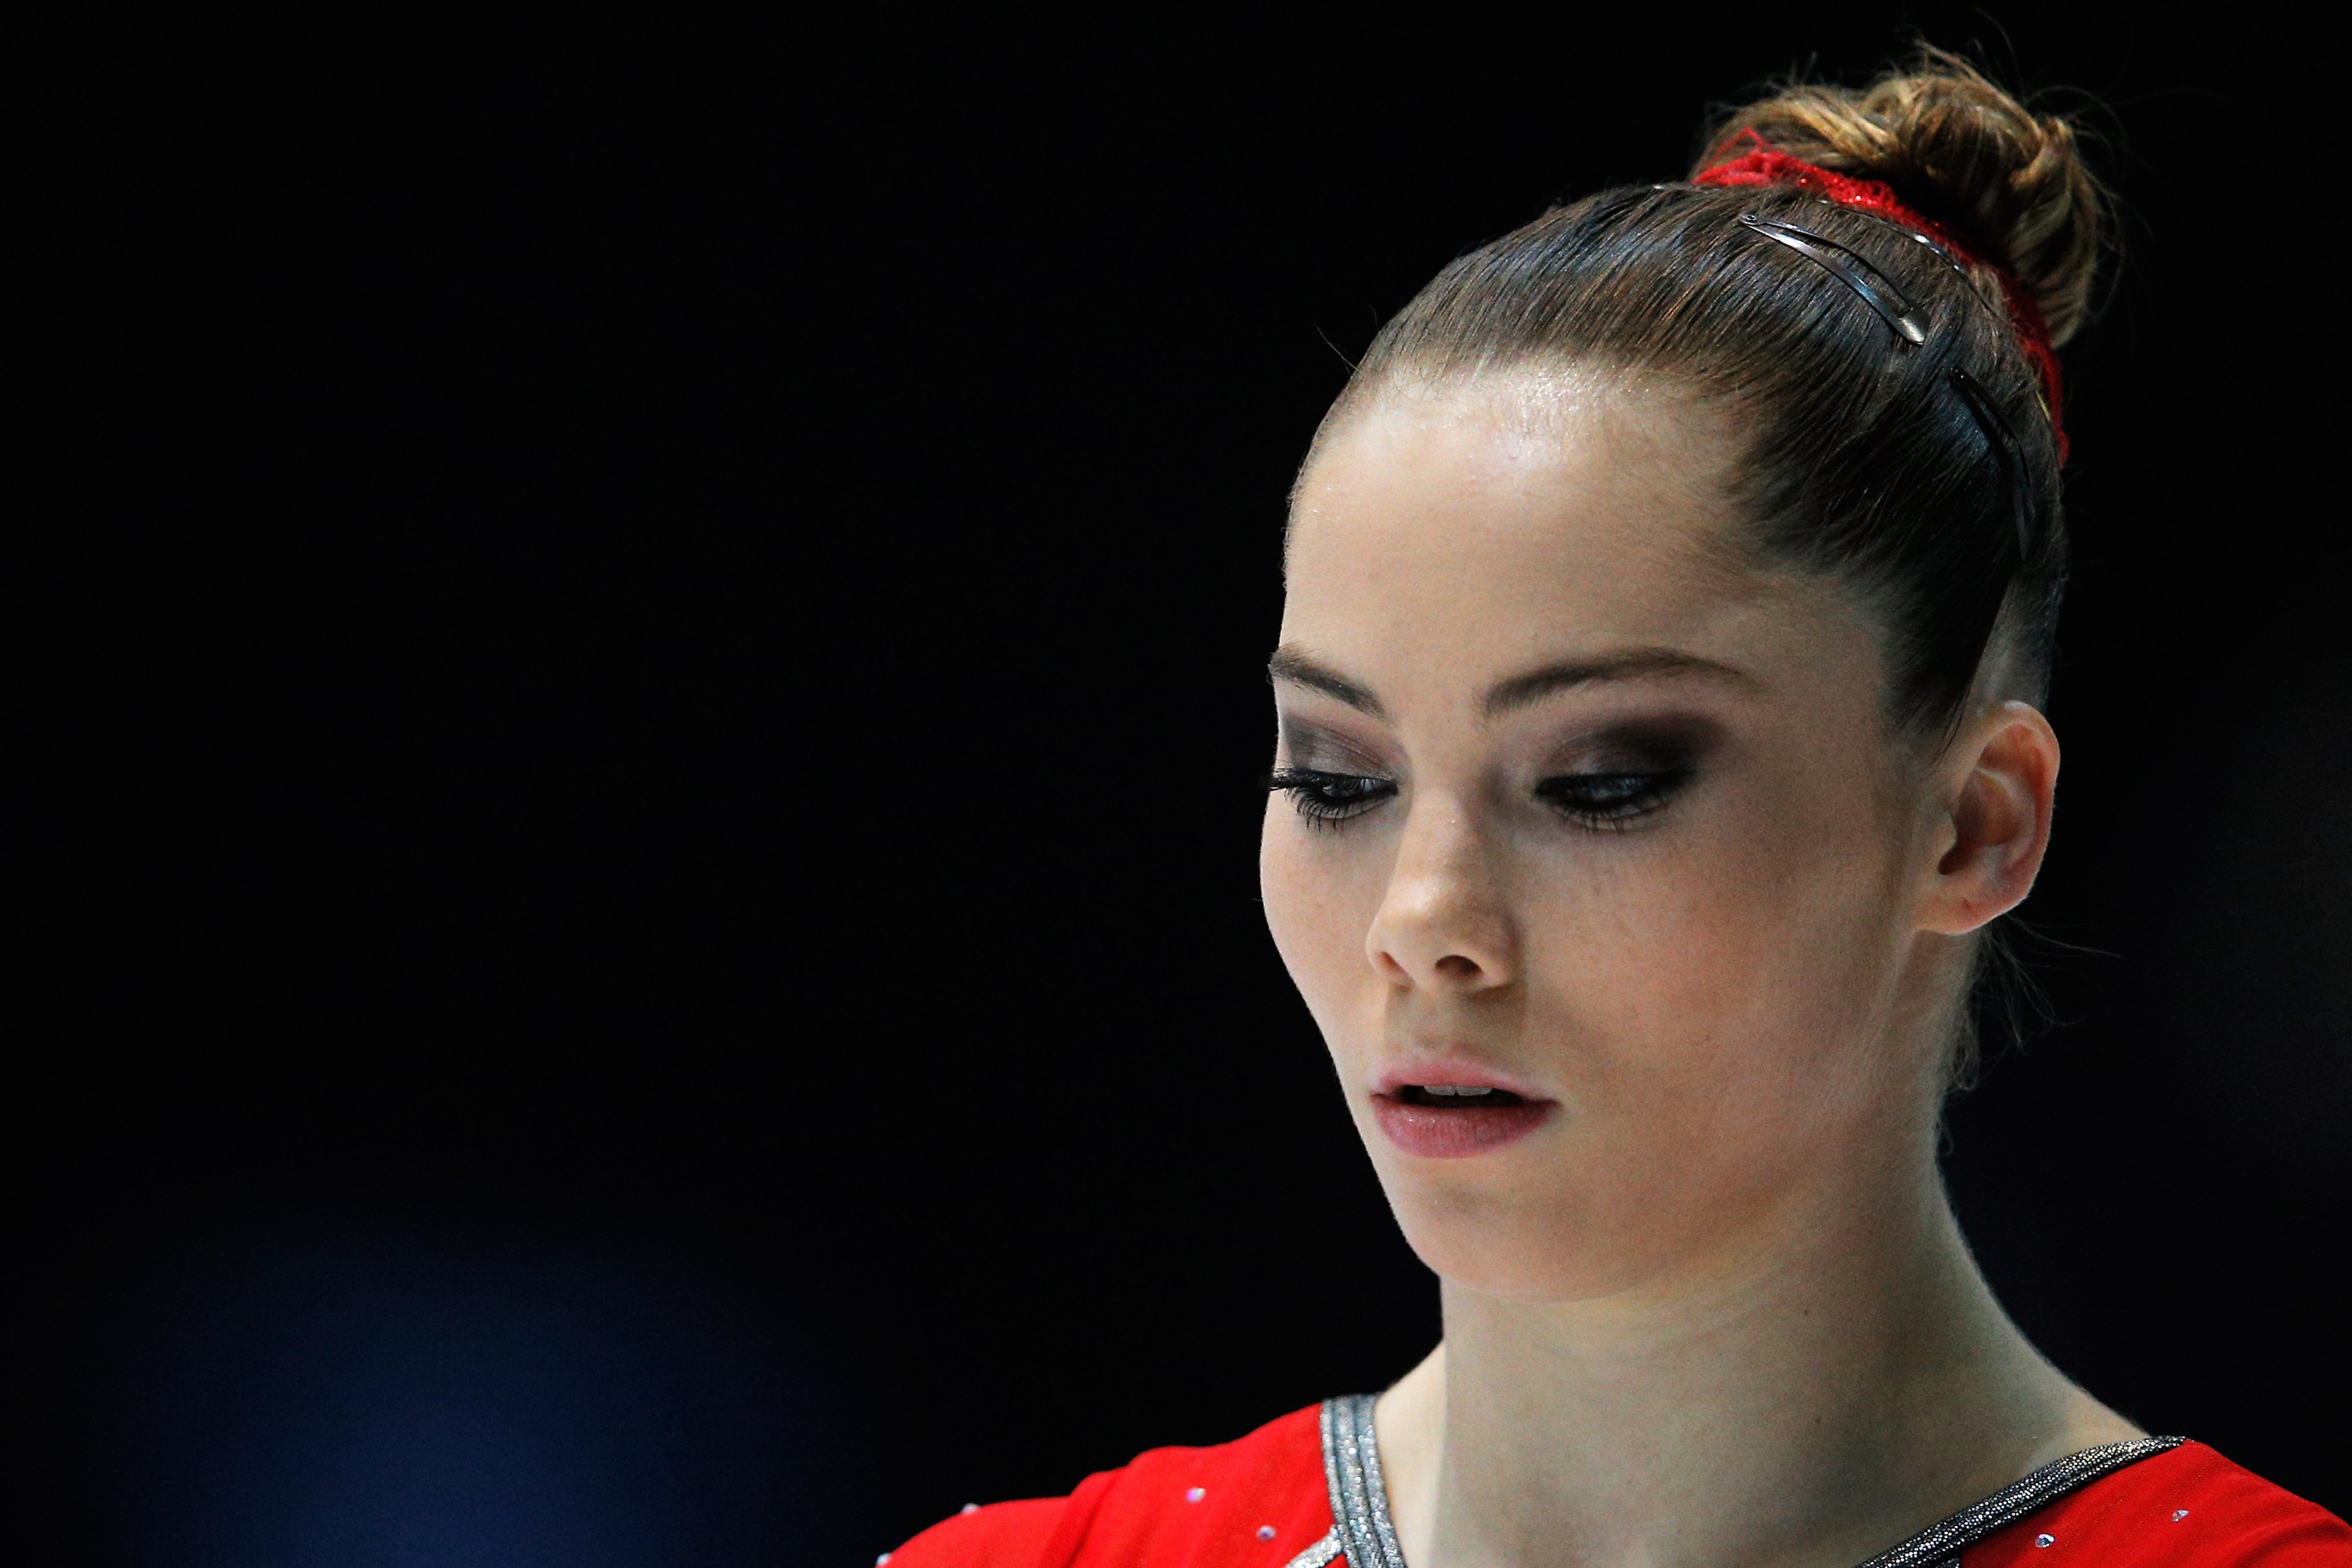 Maroney competing at the world gymnastics championships in 2013 in Antwerpen, Belgium (Dean Mouhtaropoulos&mdash;Getty Images)